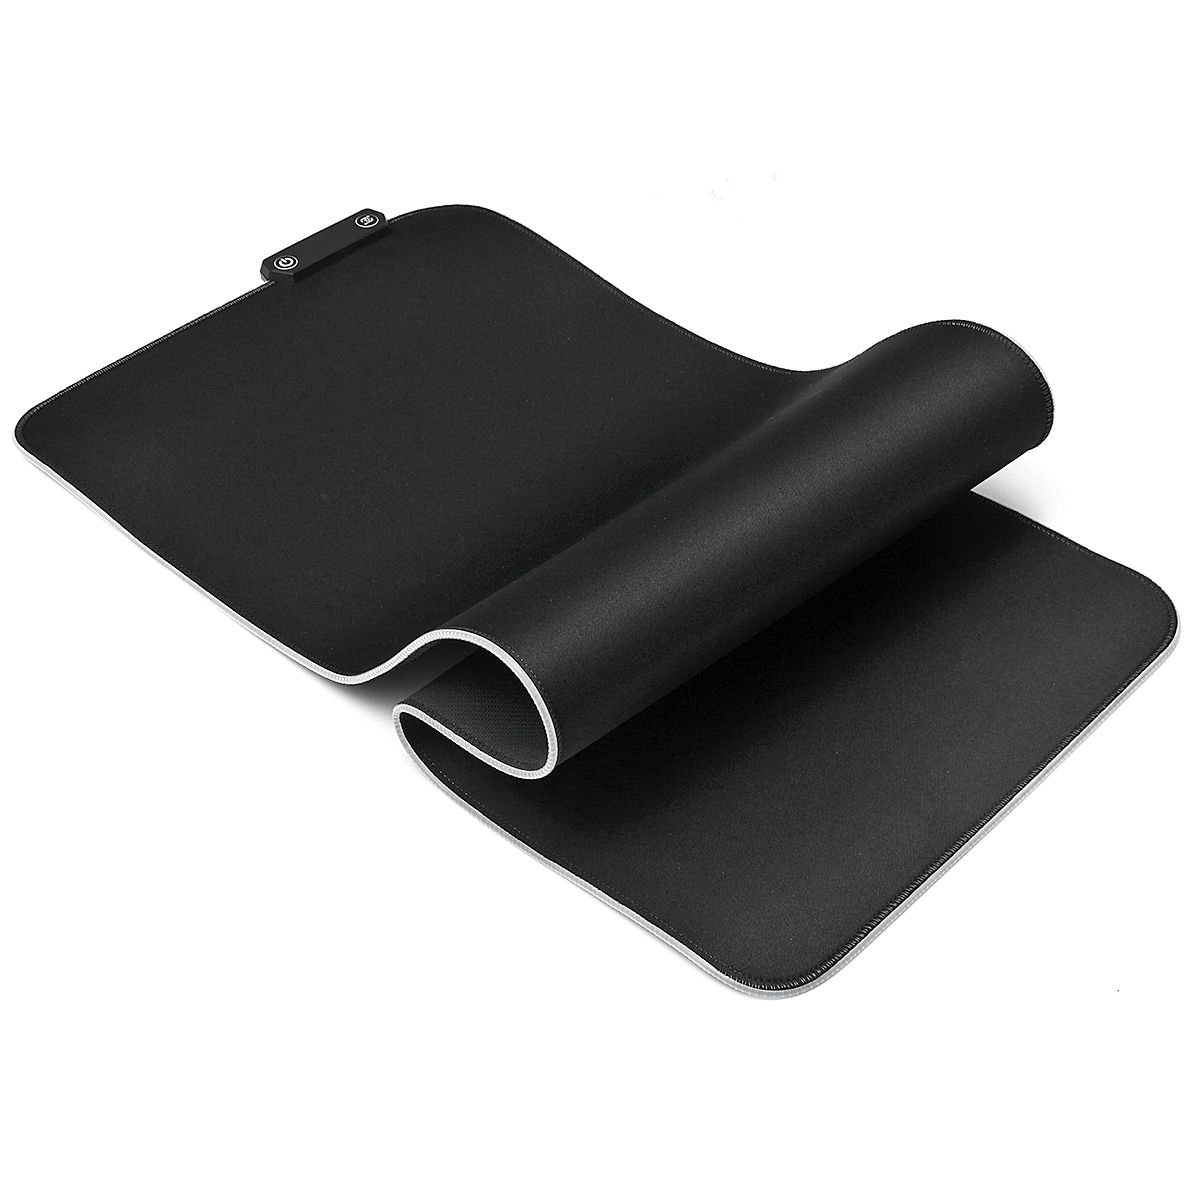 USB-Wired-Large-LED-Colorful-Backlit-Non-slip-Soft-Rubber-Mouse-Pad-1612100